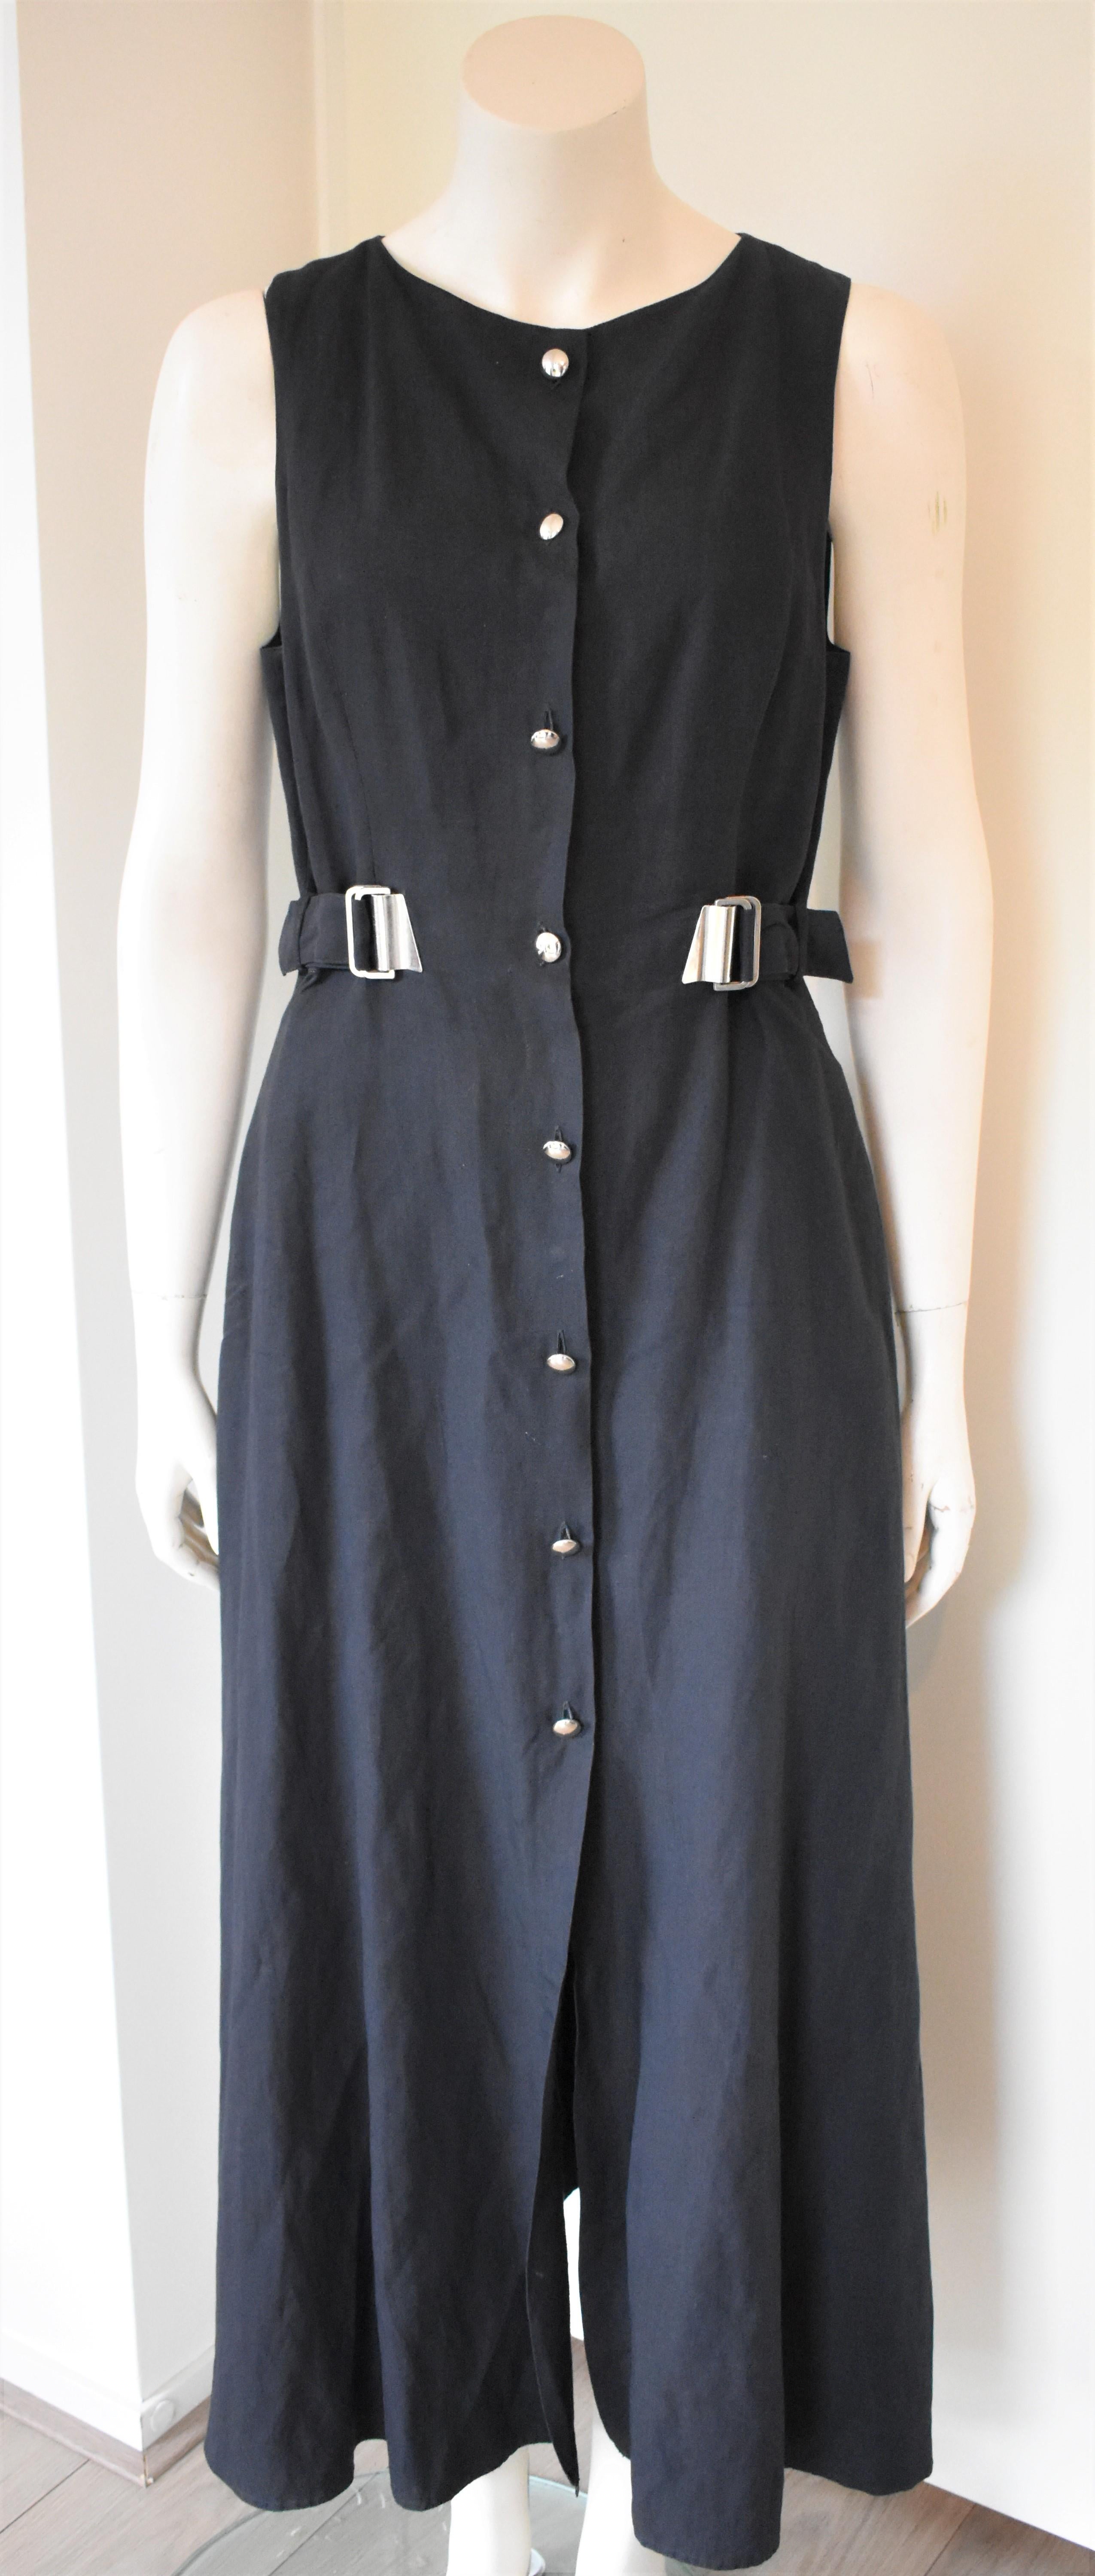 State of Claude Montana Vintage Black Dress 1990's In Good Condition For Sale In Amsterdam, NL